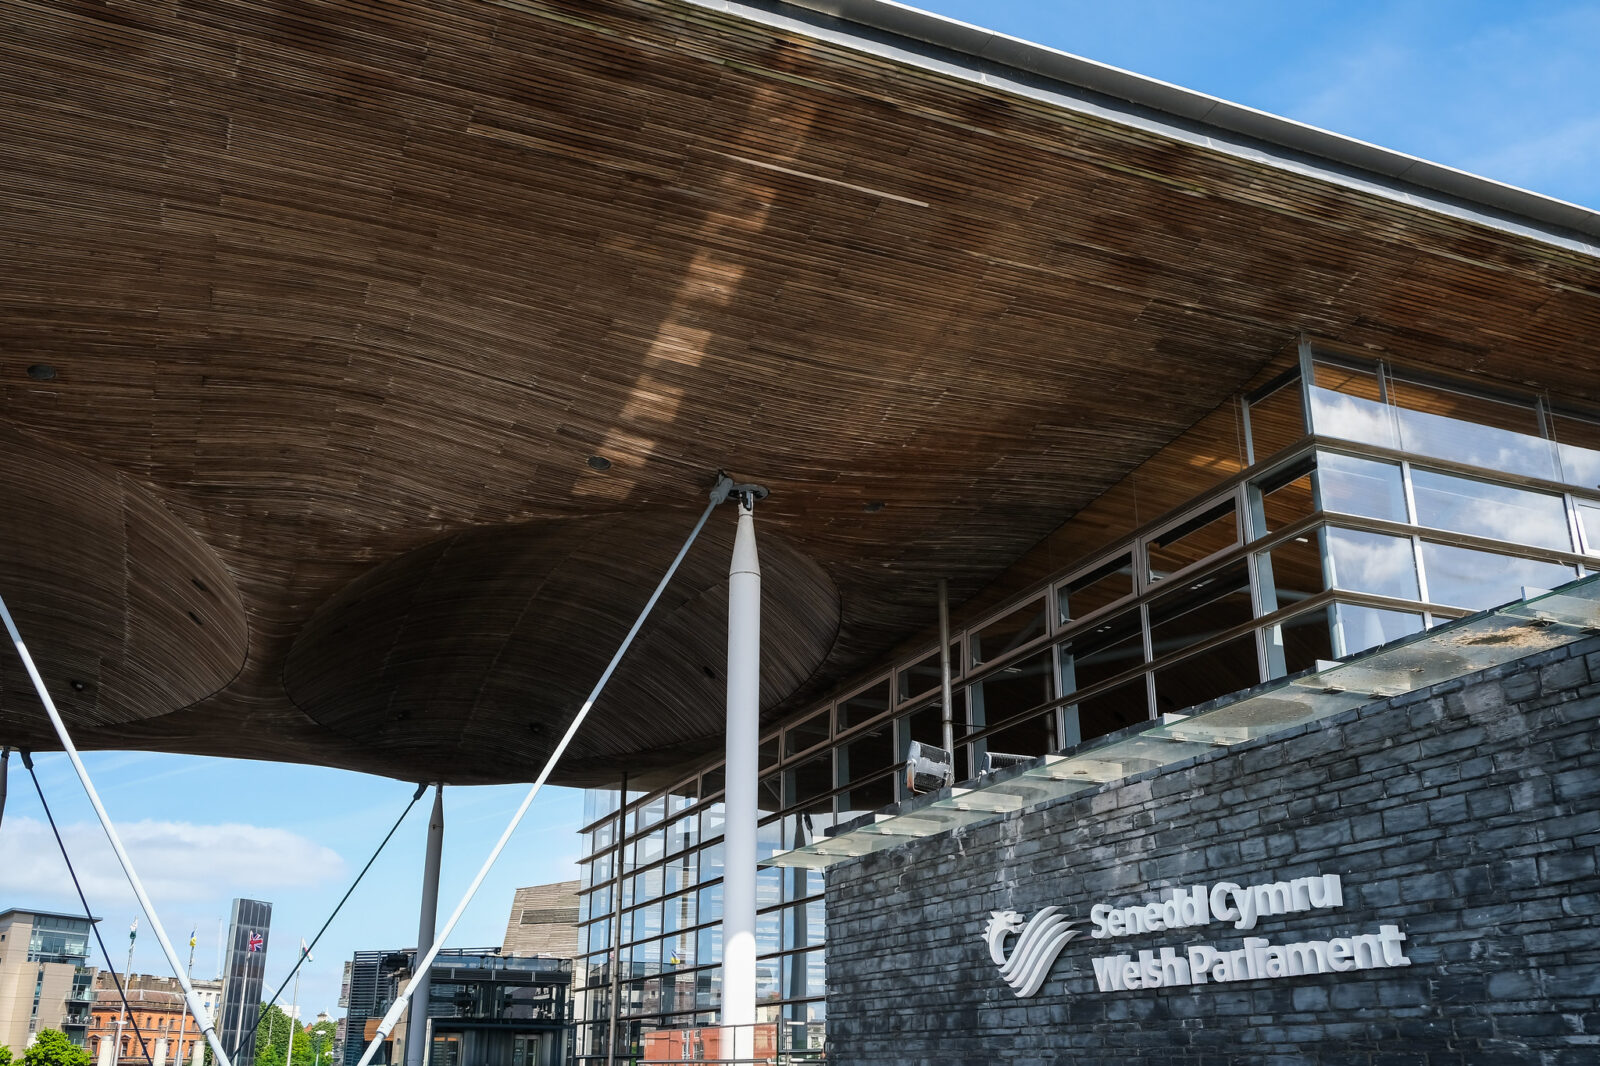 A picture of the Senedd seen from the outside, against a blue sky. In the week the Senedd turned 25, substantial reforms to the way the parliament works were passed, marking the next chapter in the ever-evolving story of devolution.